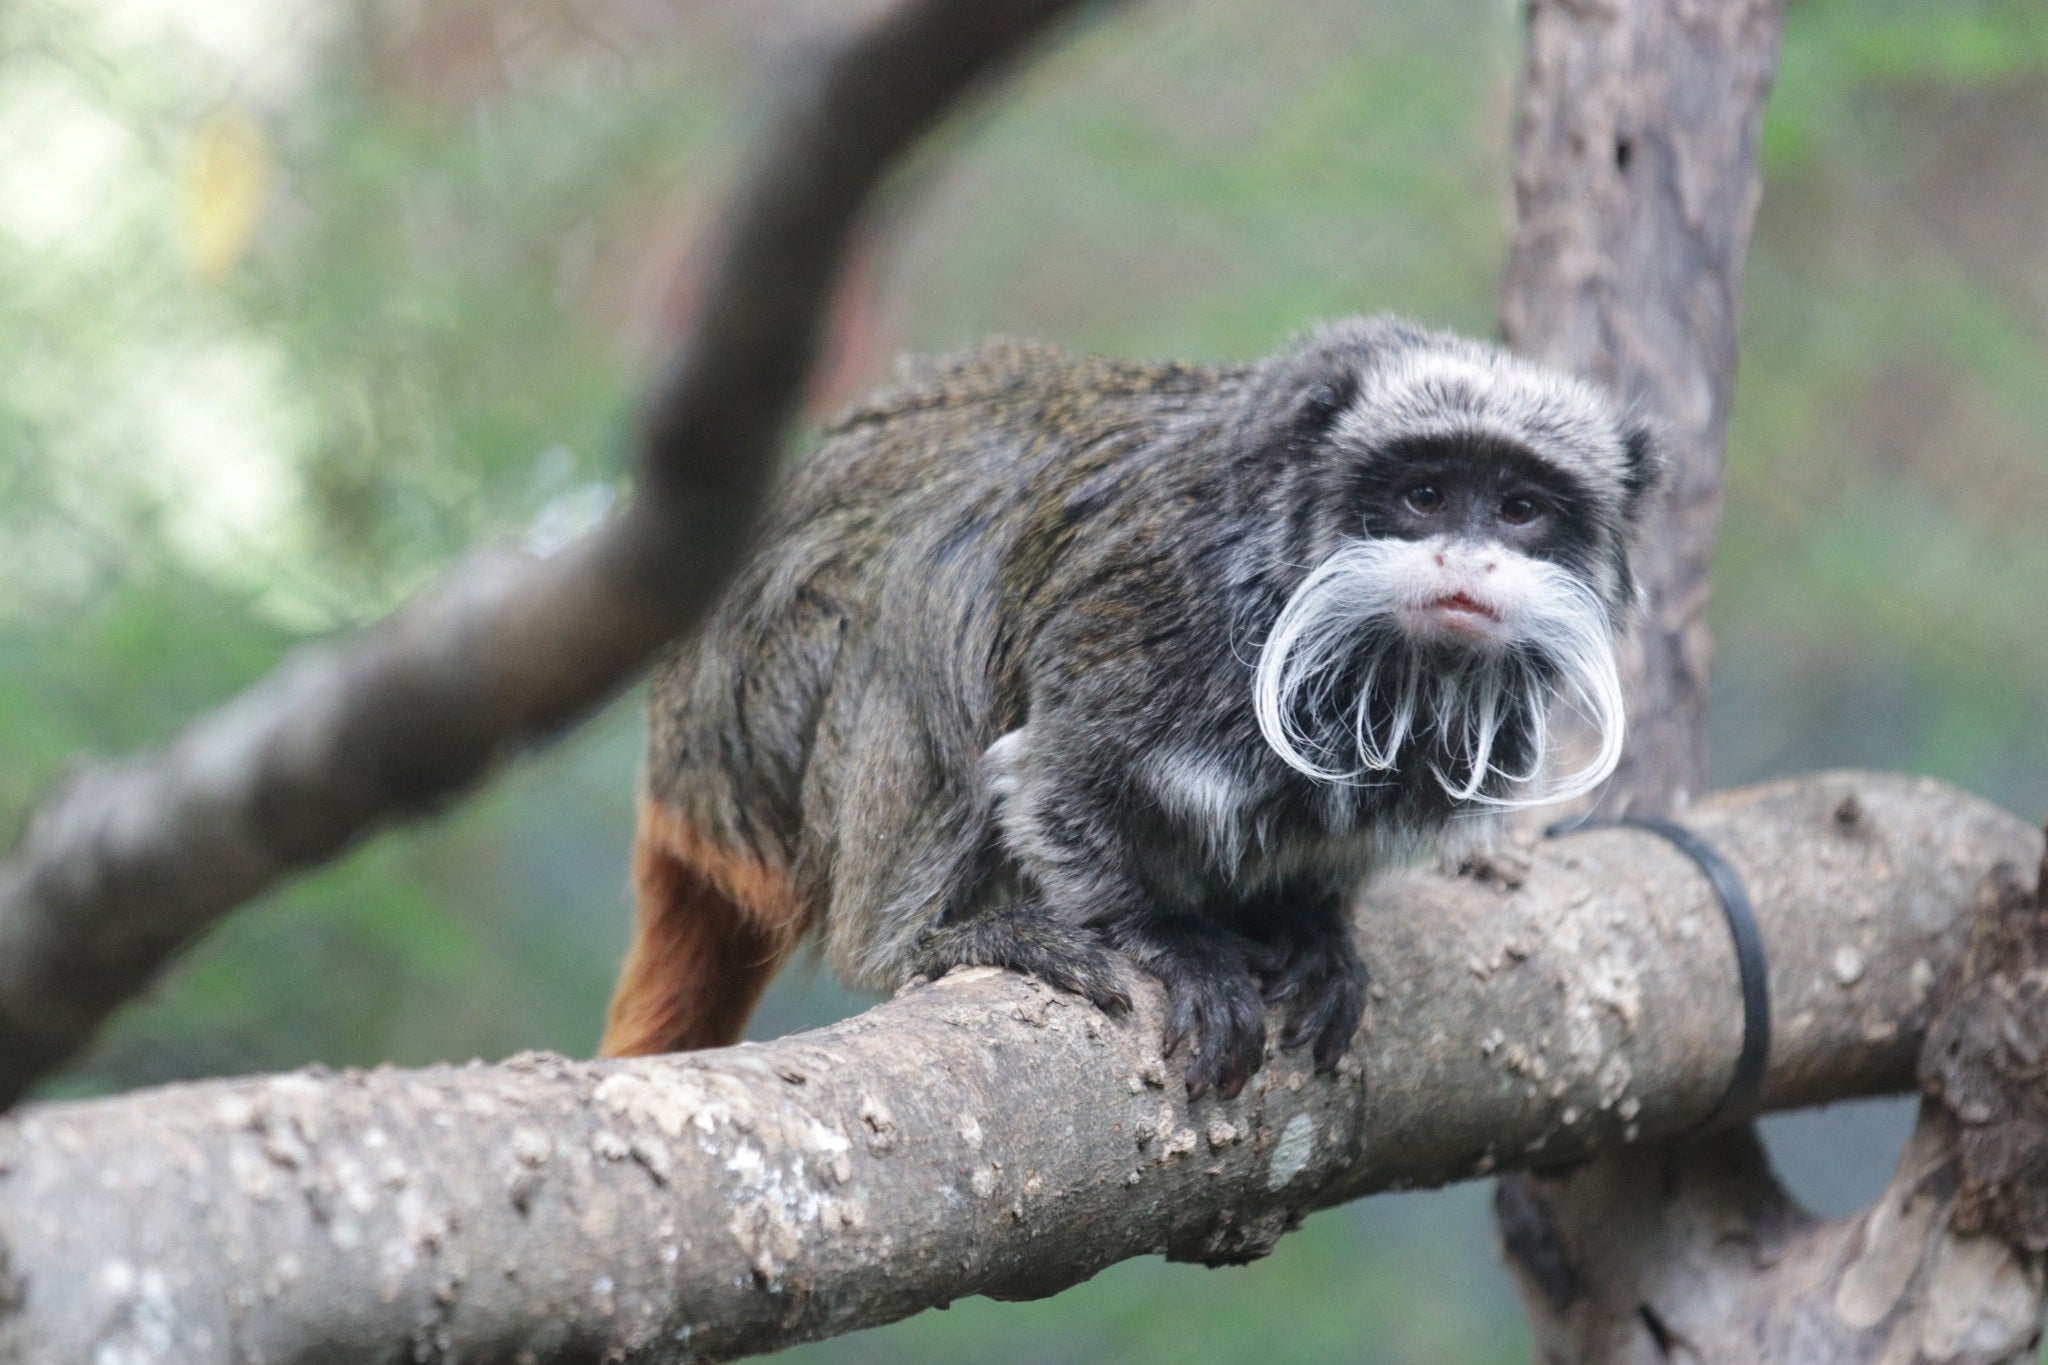 A gray monkey with a big white moustache perches on a branch.